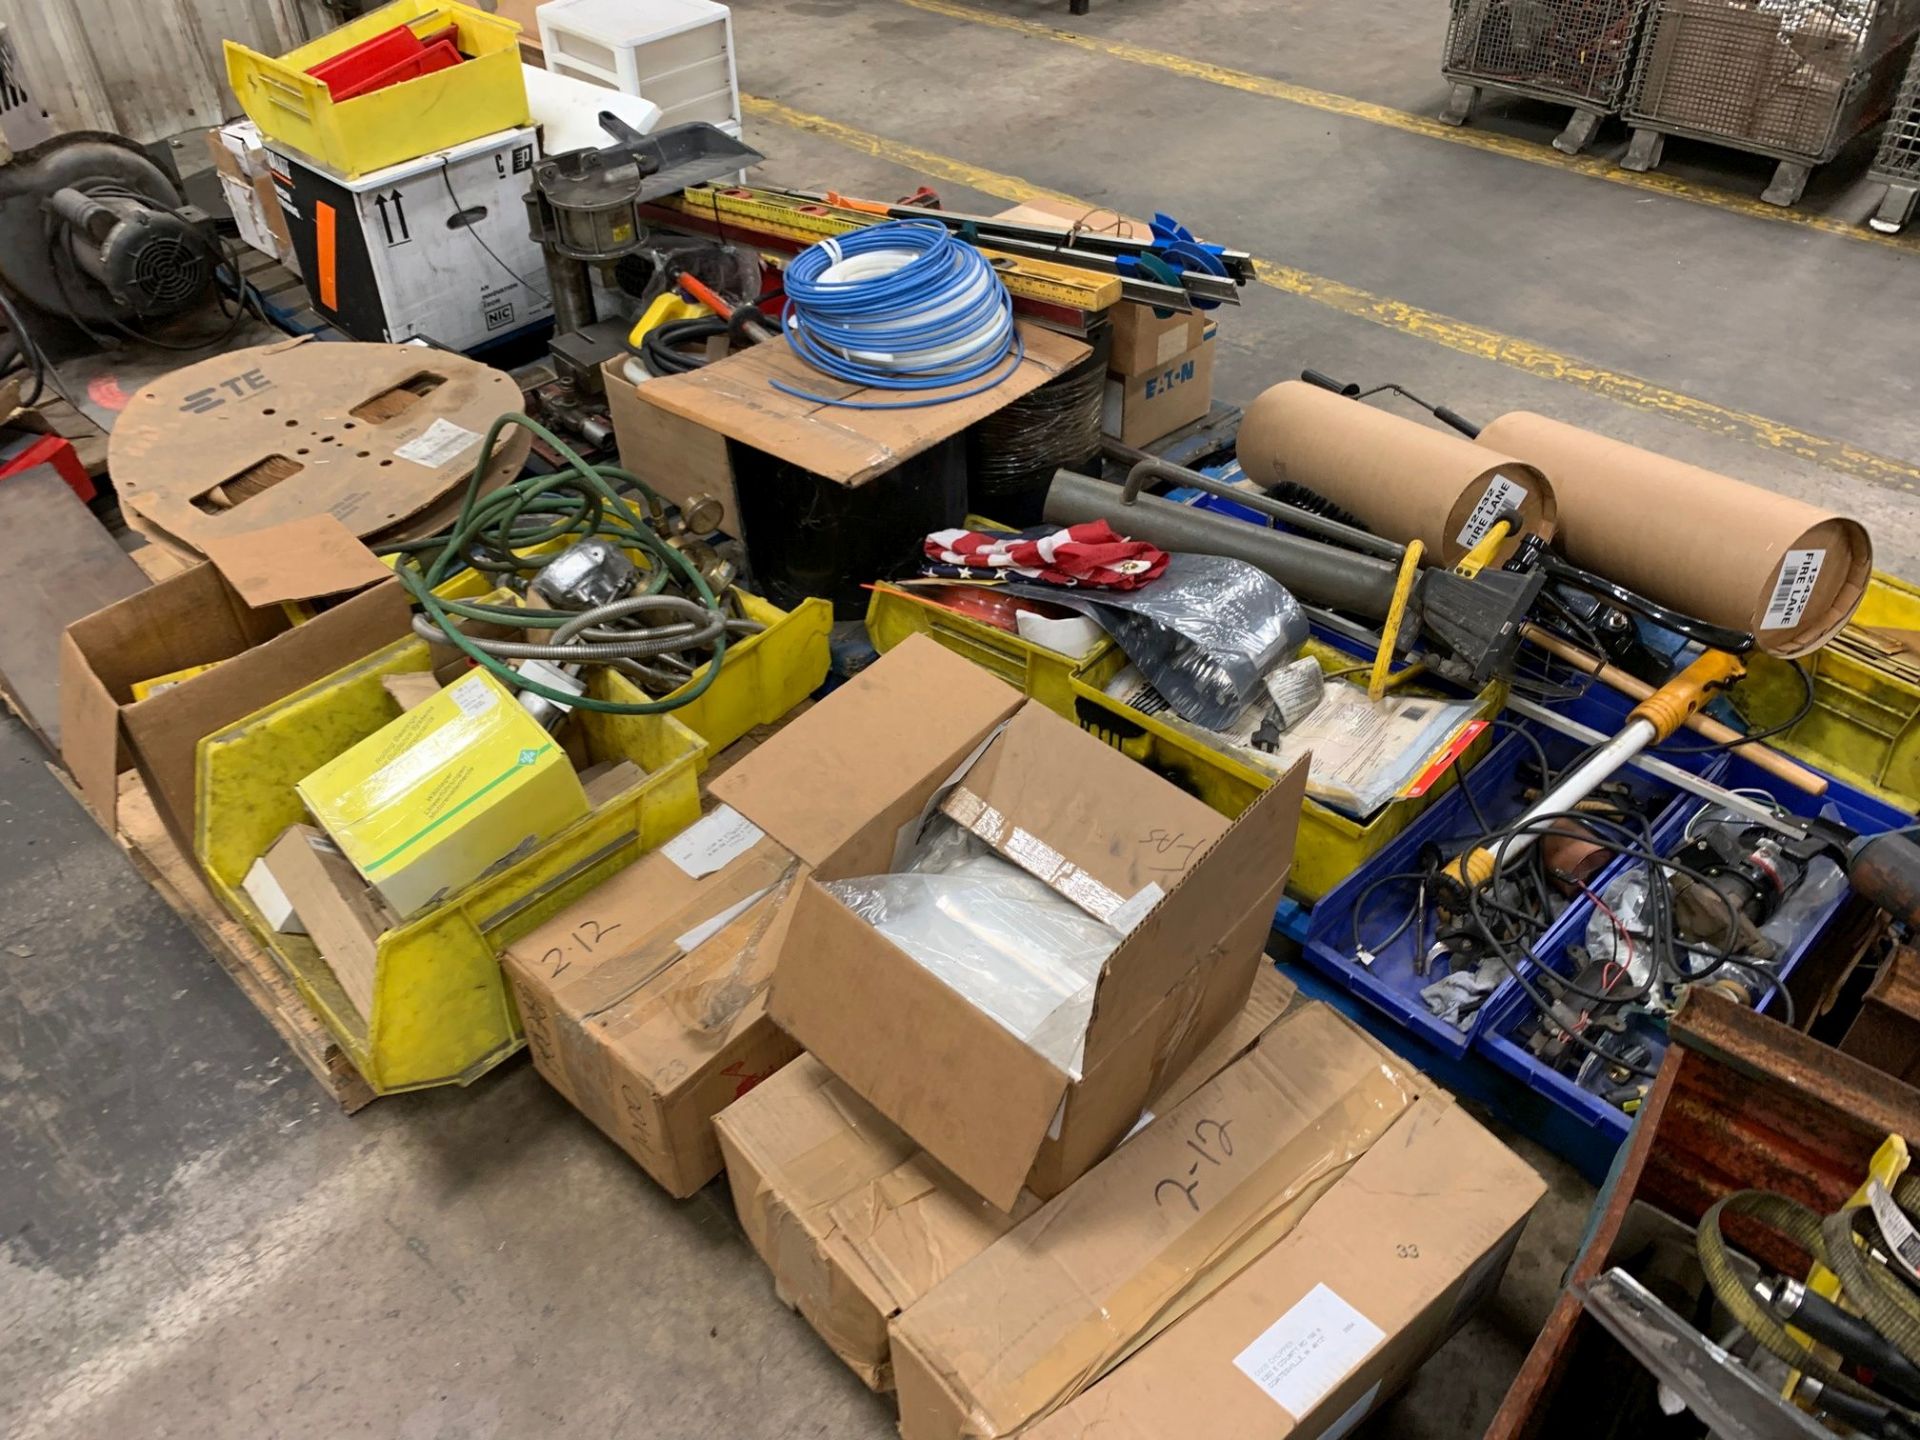 (LOT) MISCELLANEOUS PARTS, TOOLS, HOSE AND BUILDING MAINTENANCE SUPPLIES - Image 2 of 5